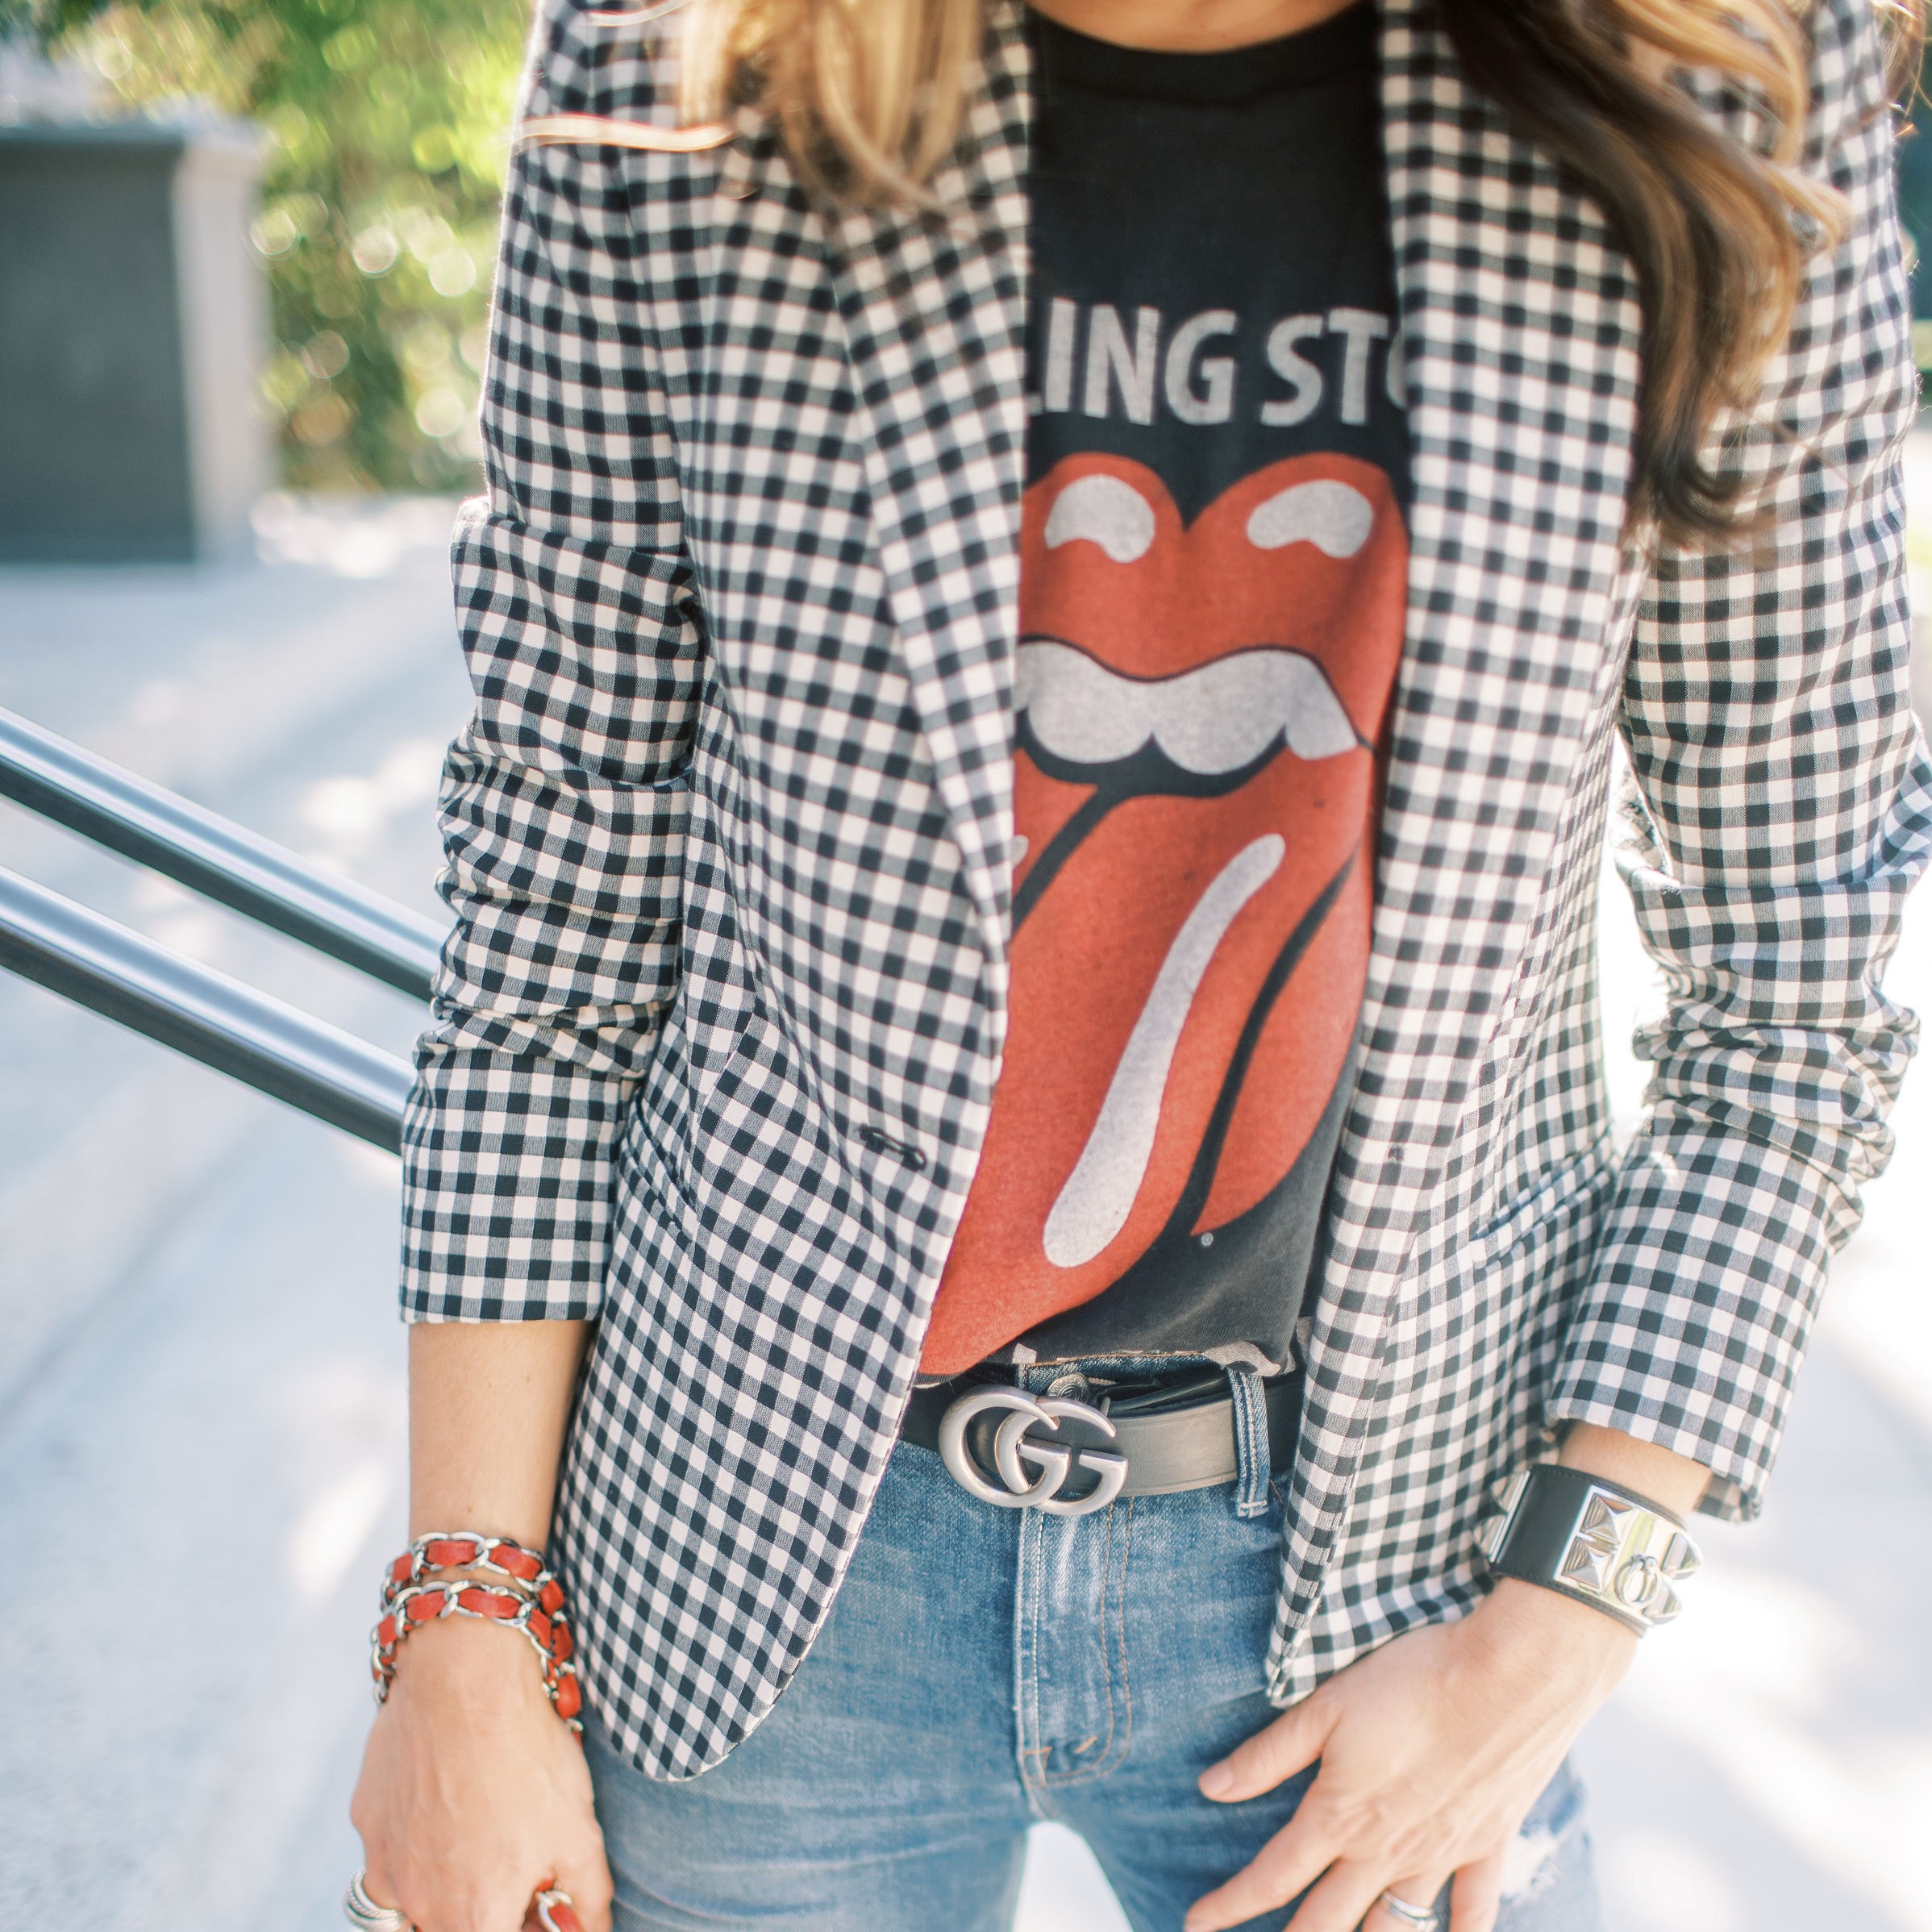 Styled to A Tee | Graphic T-Shirts the Most Coveted Street Style Staple.